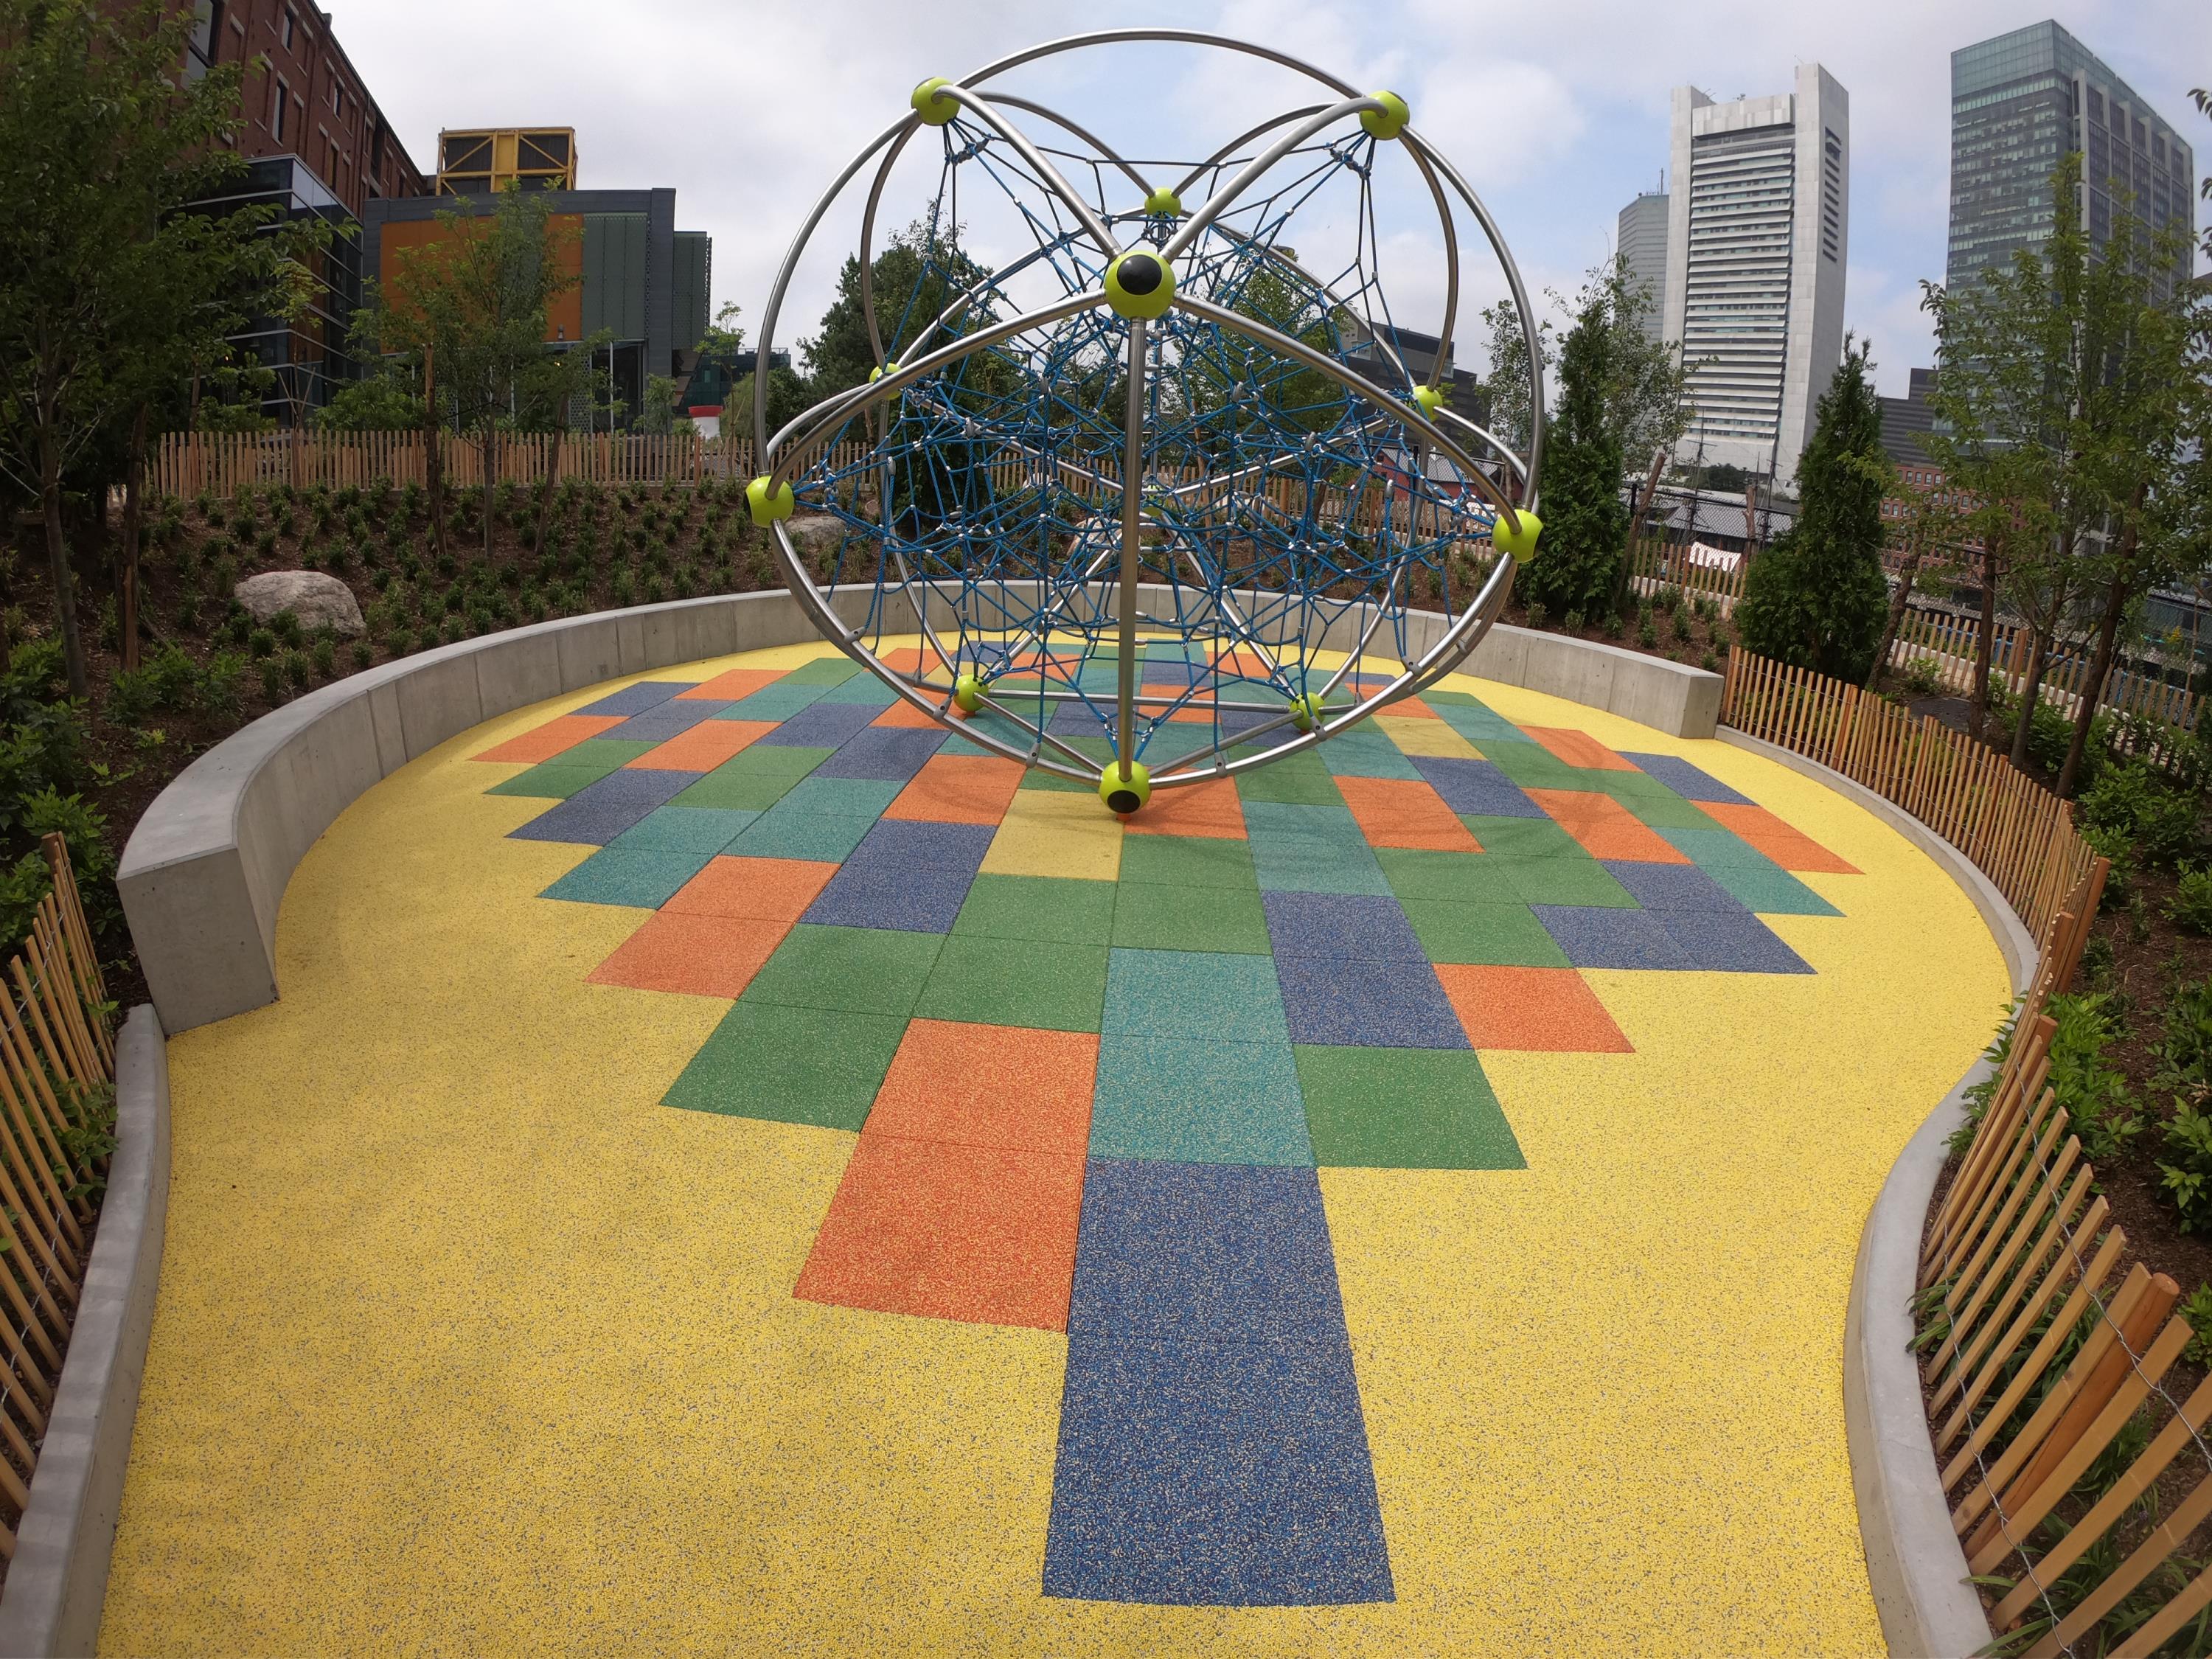 School playground surfacing with design using pigmented colors